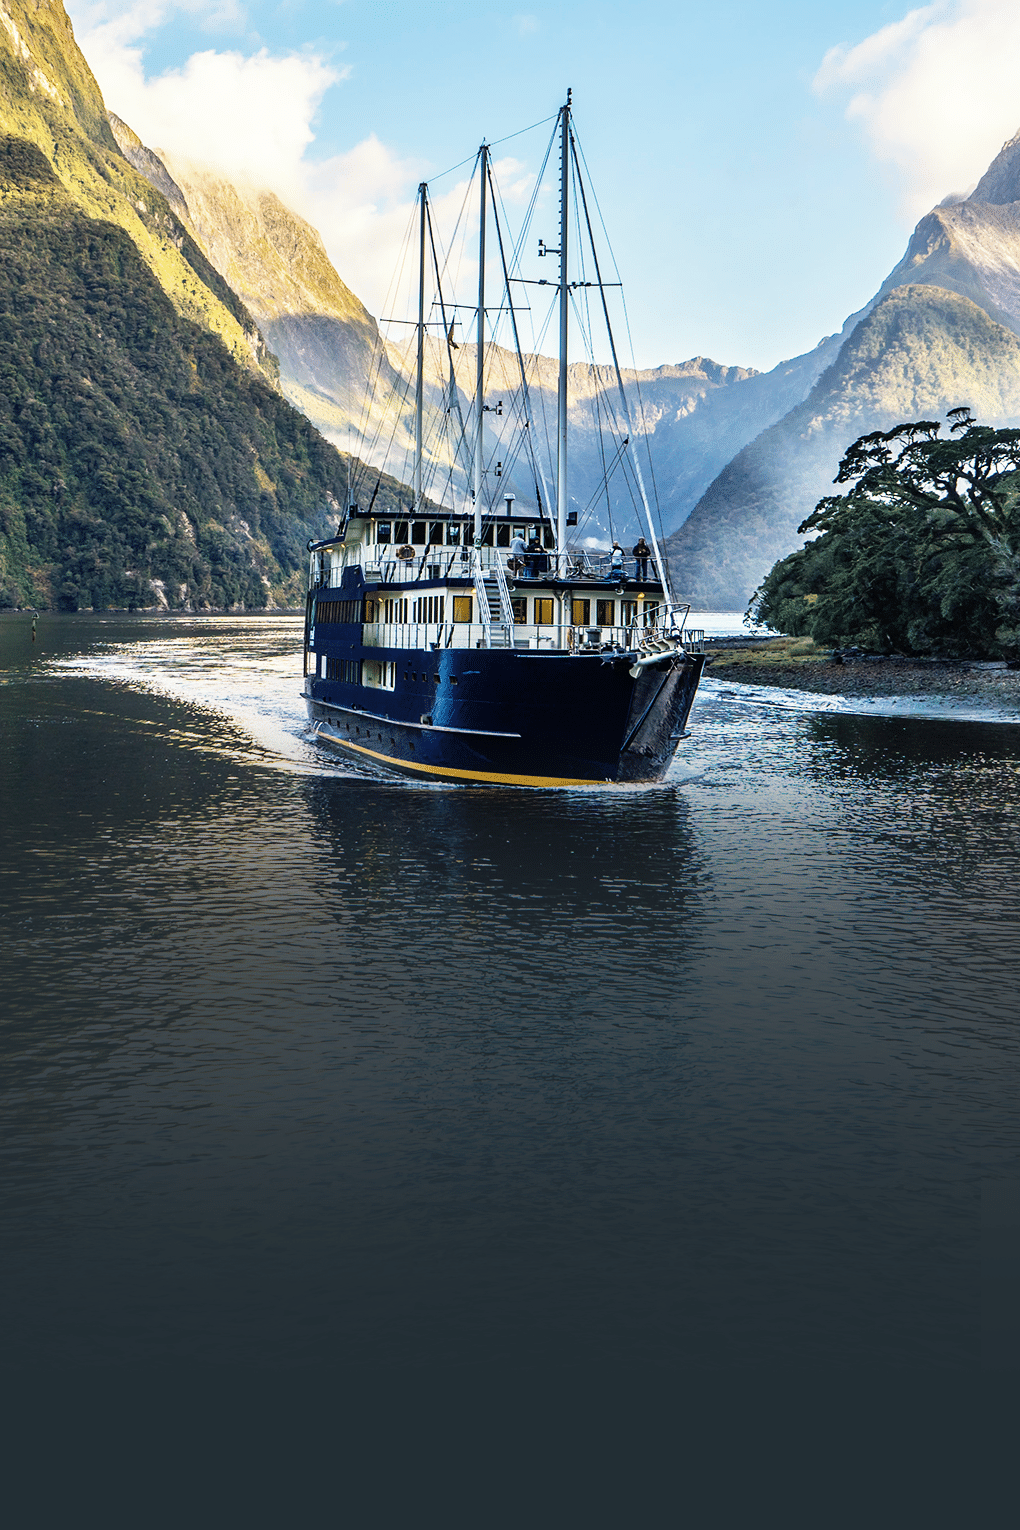 Scenic Trip to New Zealand with FREE Milford Sound Cruise